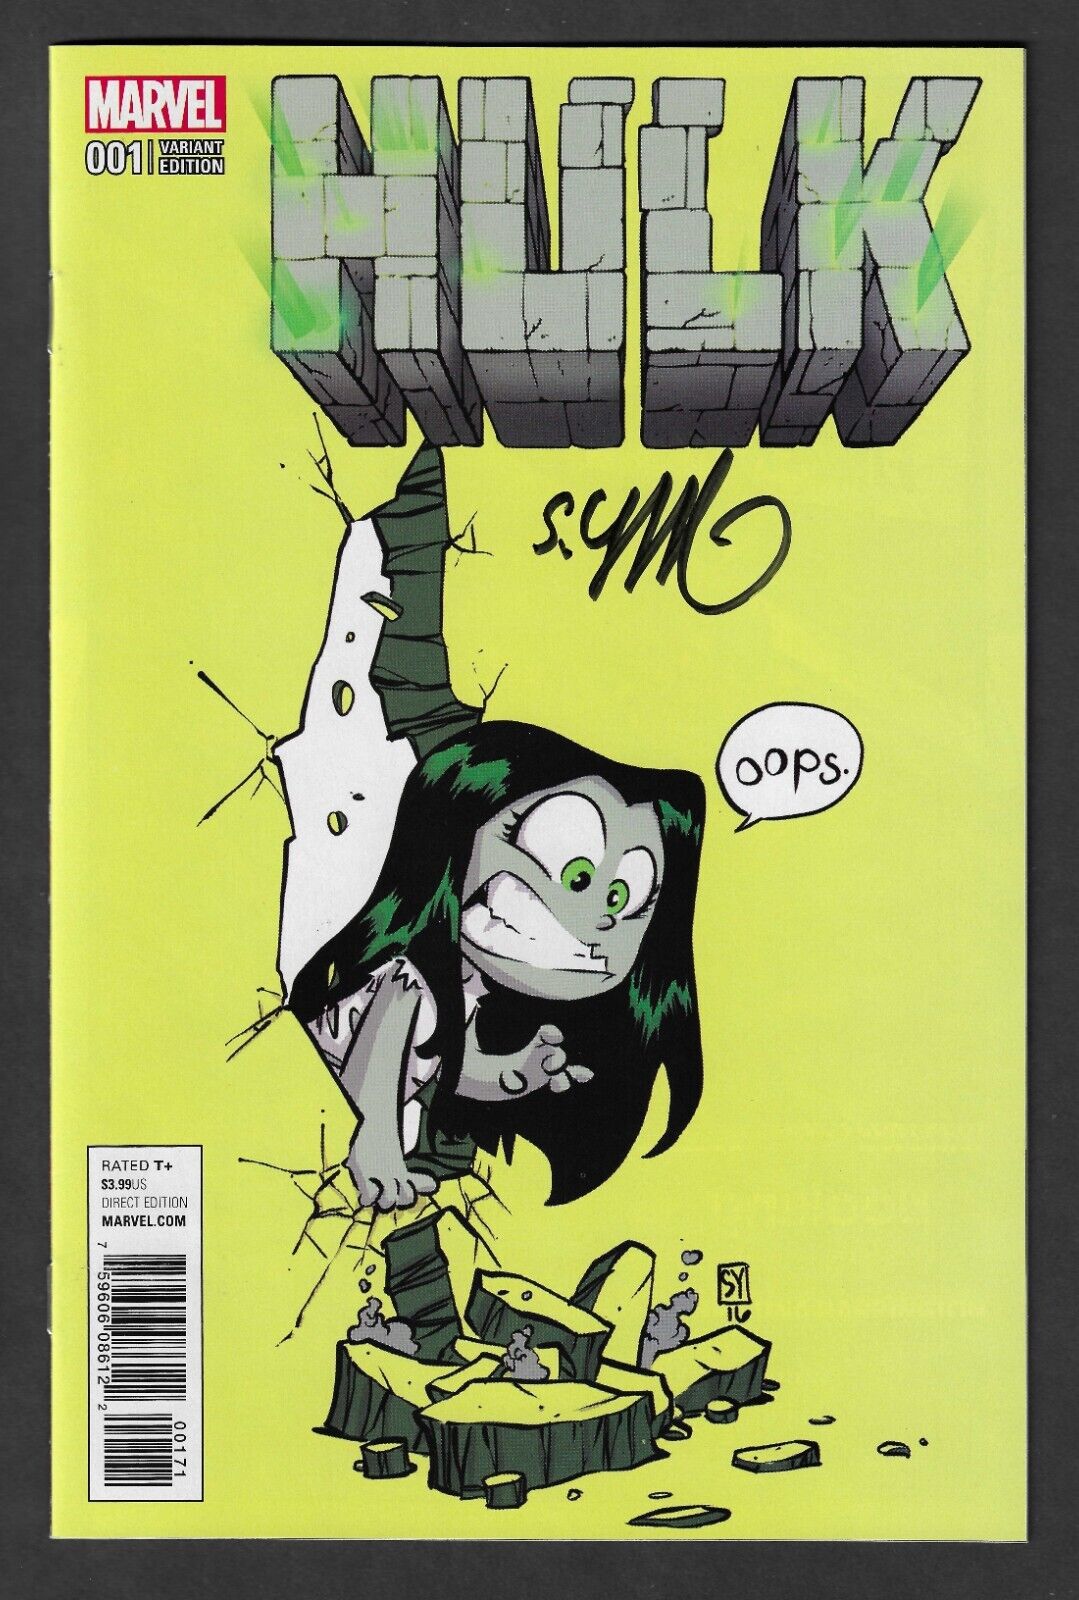 HULK #1 (2016) SIGNED BY SKOTTIE YOUNG  *** RARE GRAY SHE-HULK OOPS VARIANT ***